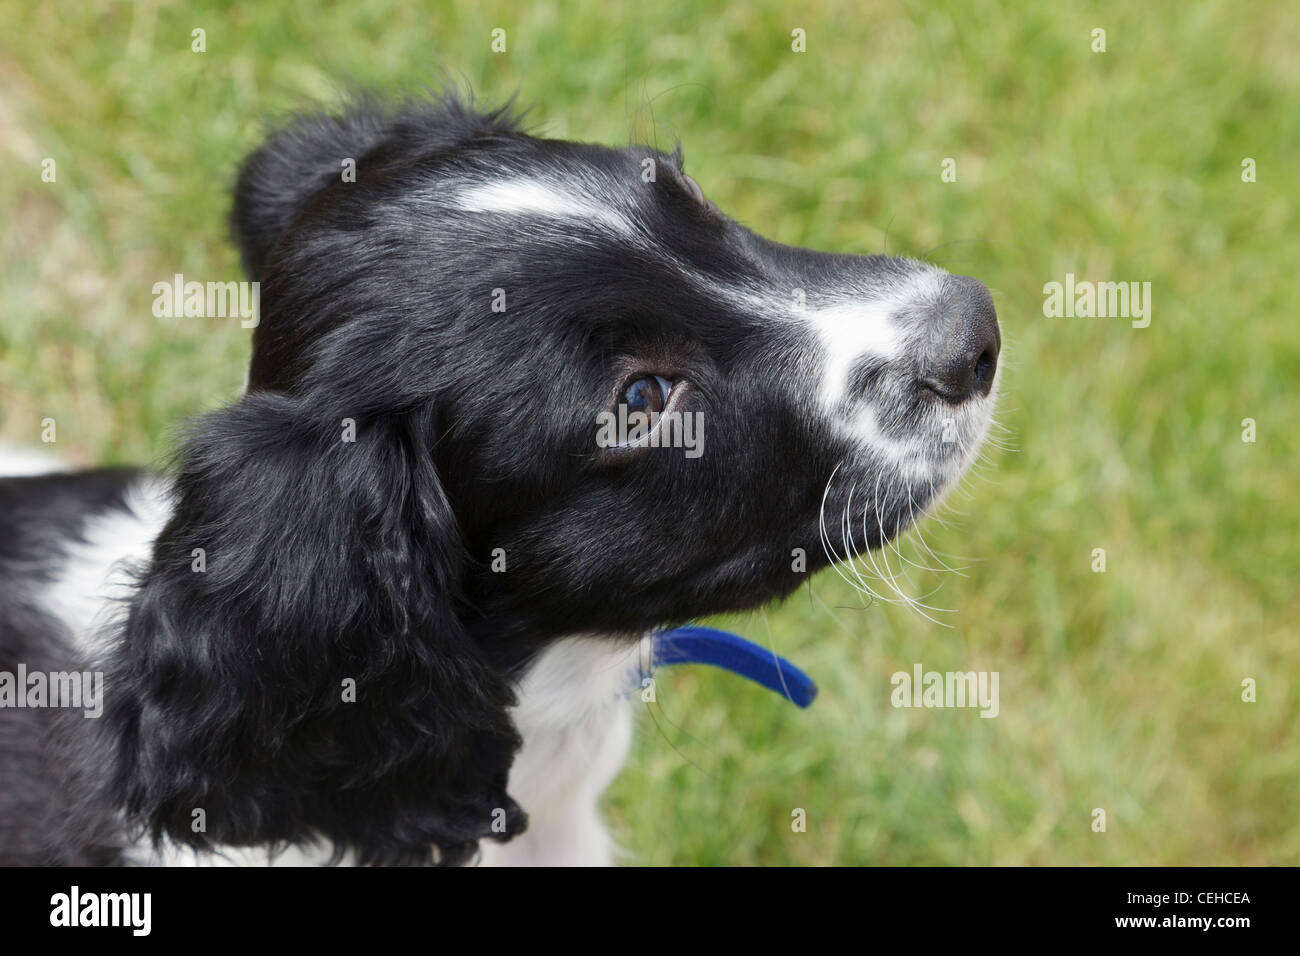 A ten week old black and white English Springer Spaniel puppy dog in a garden from above. England UK Britain Stock Photo